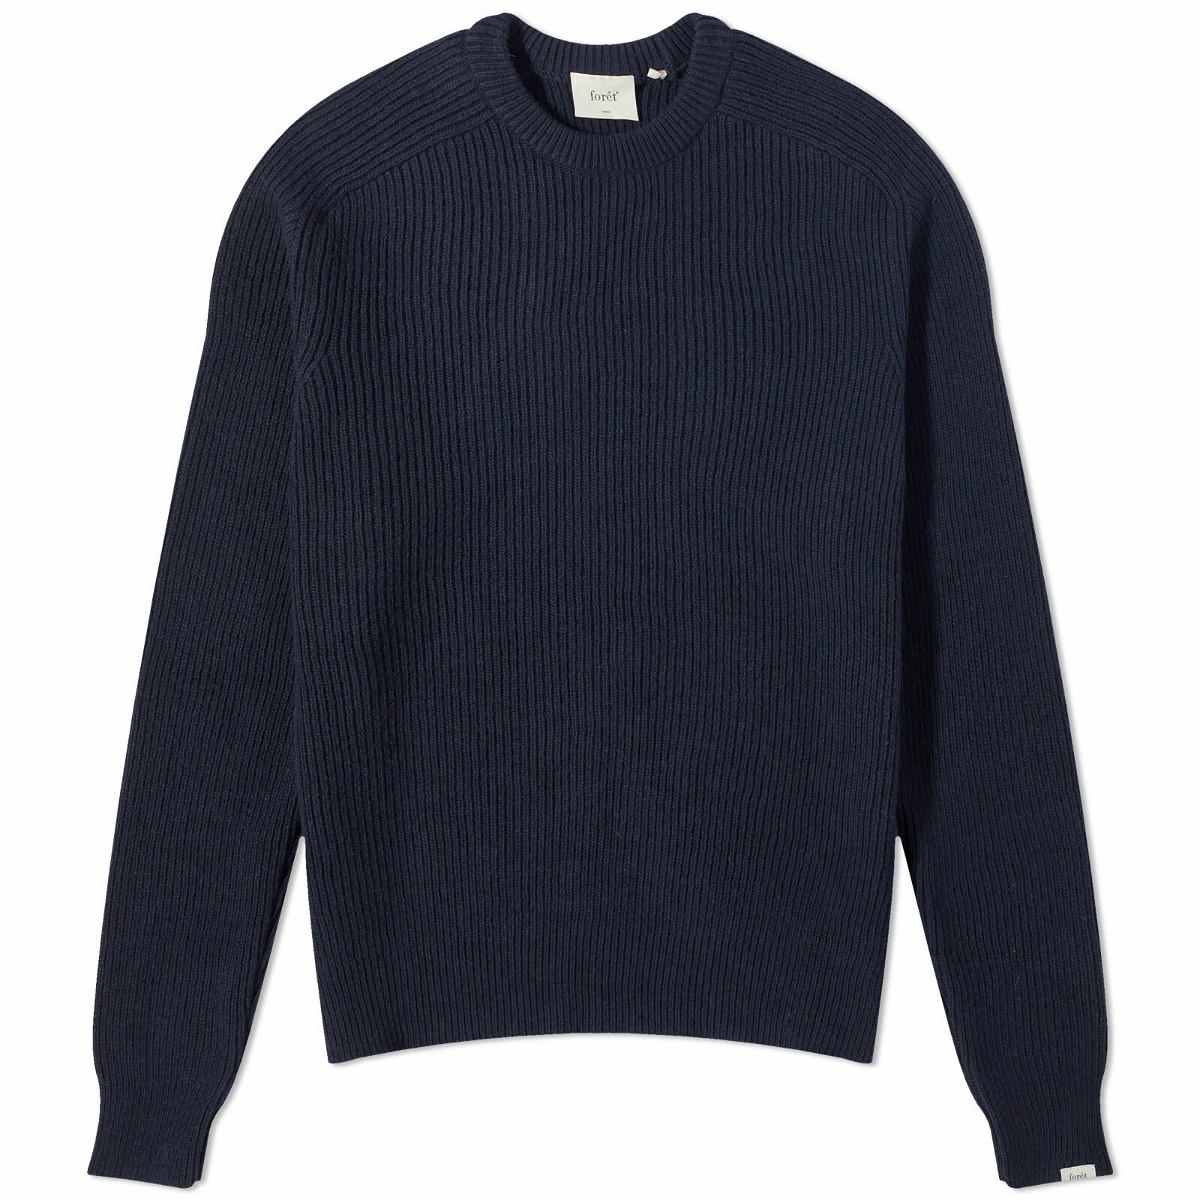 Foret Men's Cone Ribbed Crew Neck Knit in Navy Foret